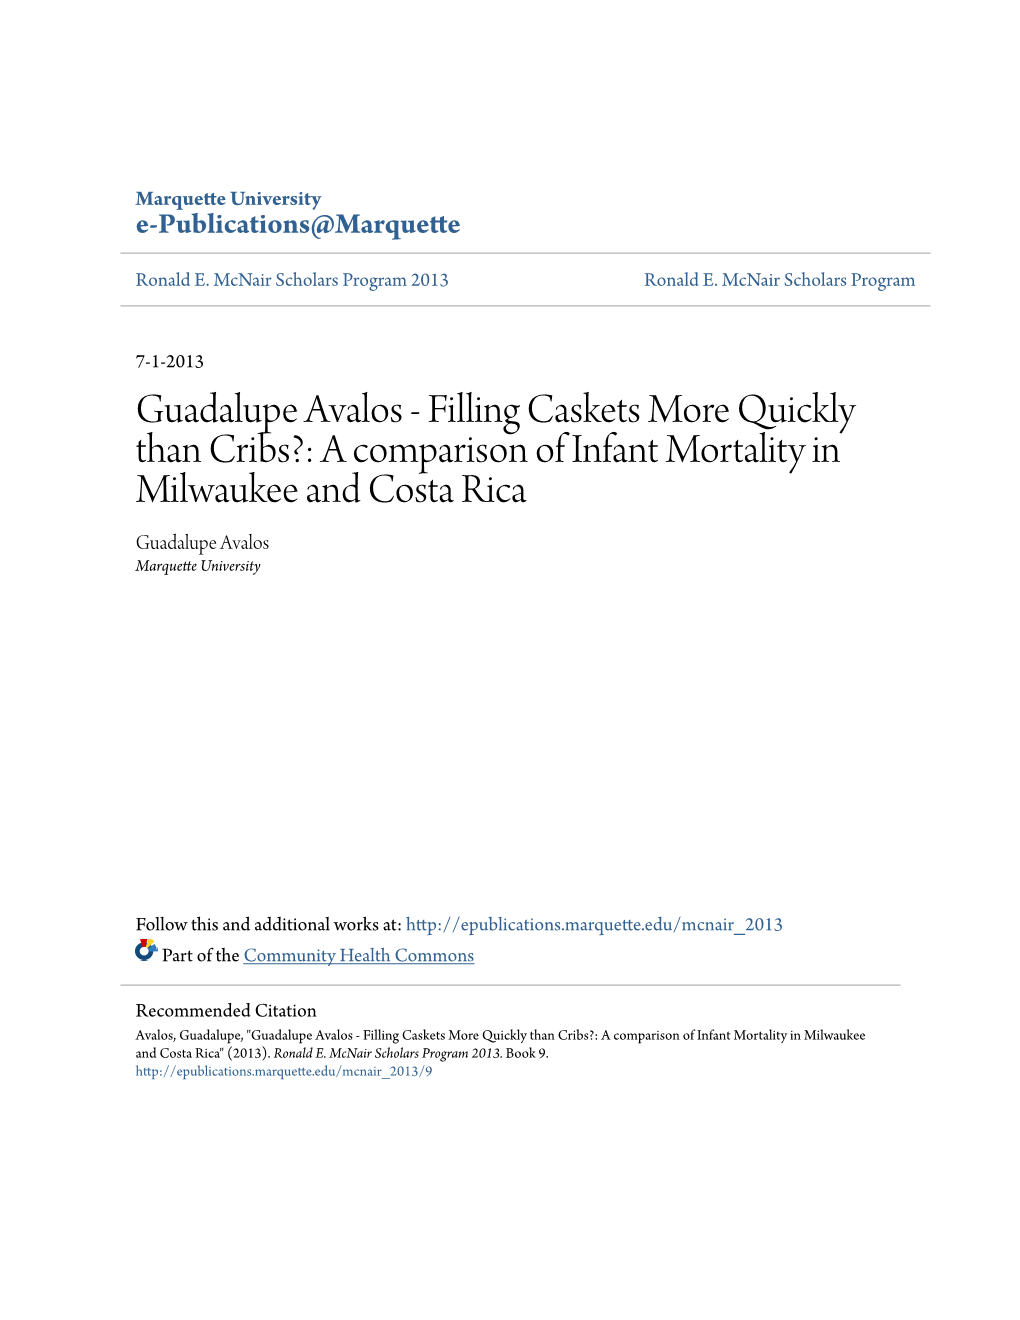 Filling Caskets More Quickly Than Cribs?: a Comparison of Infant Mortality in Milwaukee and Costa Rica Guadalupe Avalos Marquette University